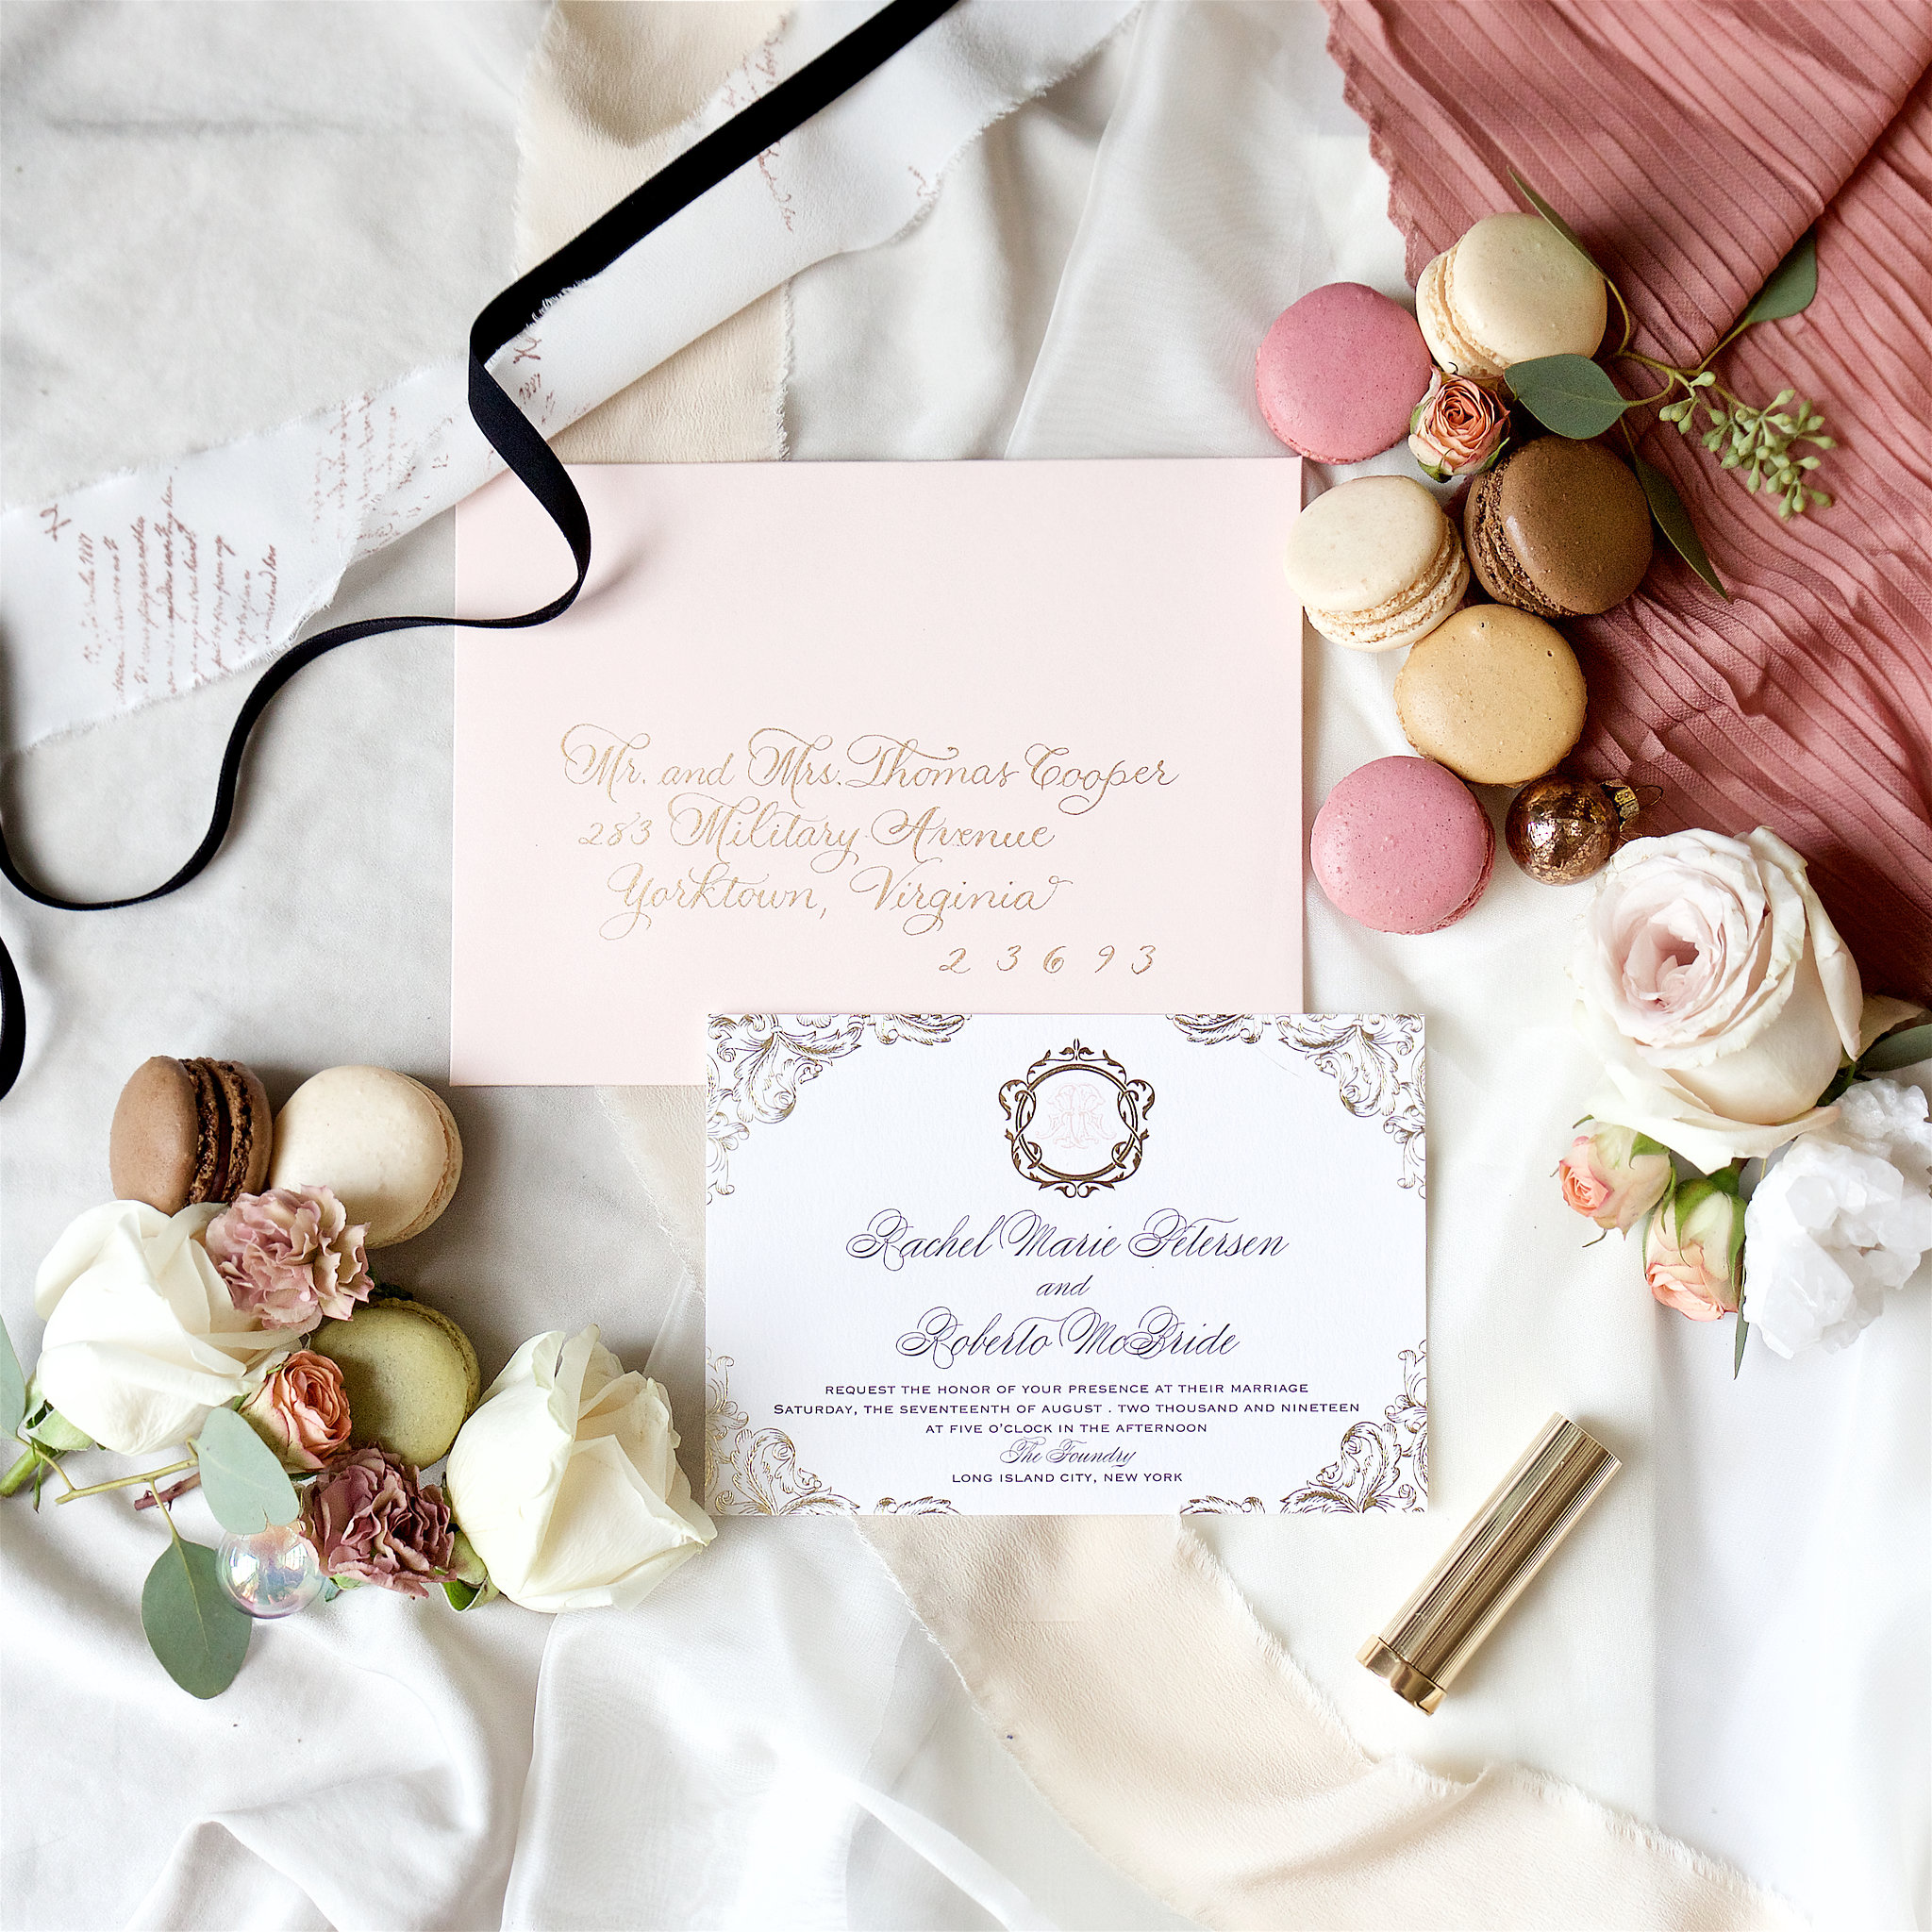 Feminine vintage French flat lay invitation suite with macarons Anthropologie Free People Etsy designer. Branding product photographer Chelsea Loren styling floral macaron flat lays.